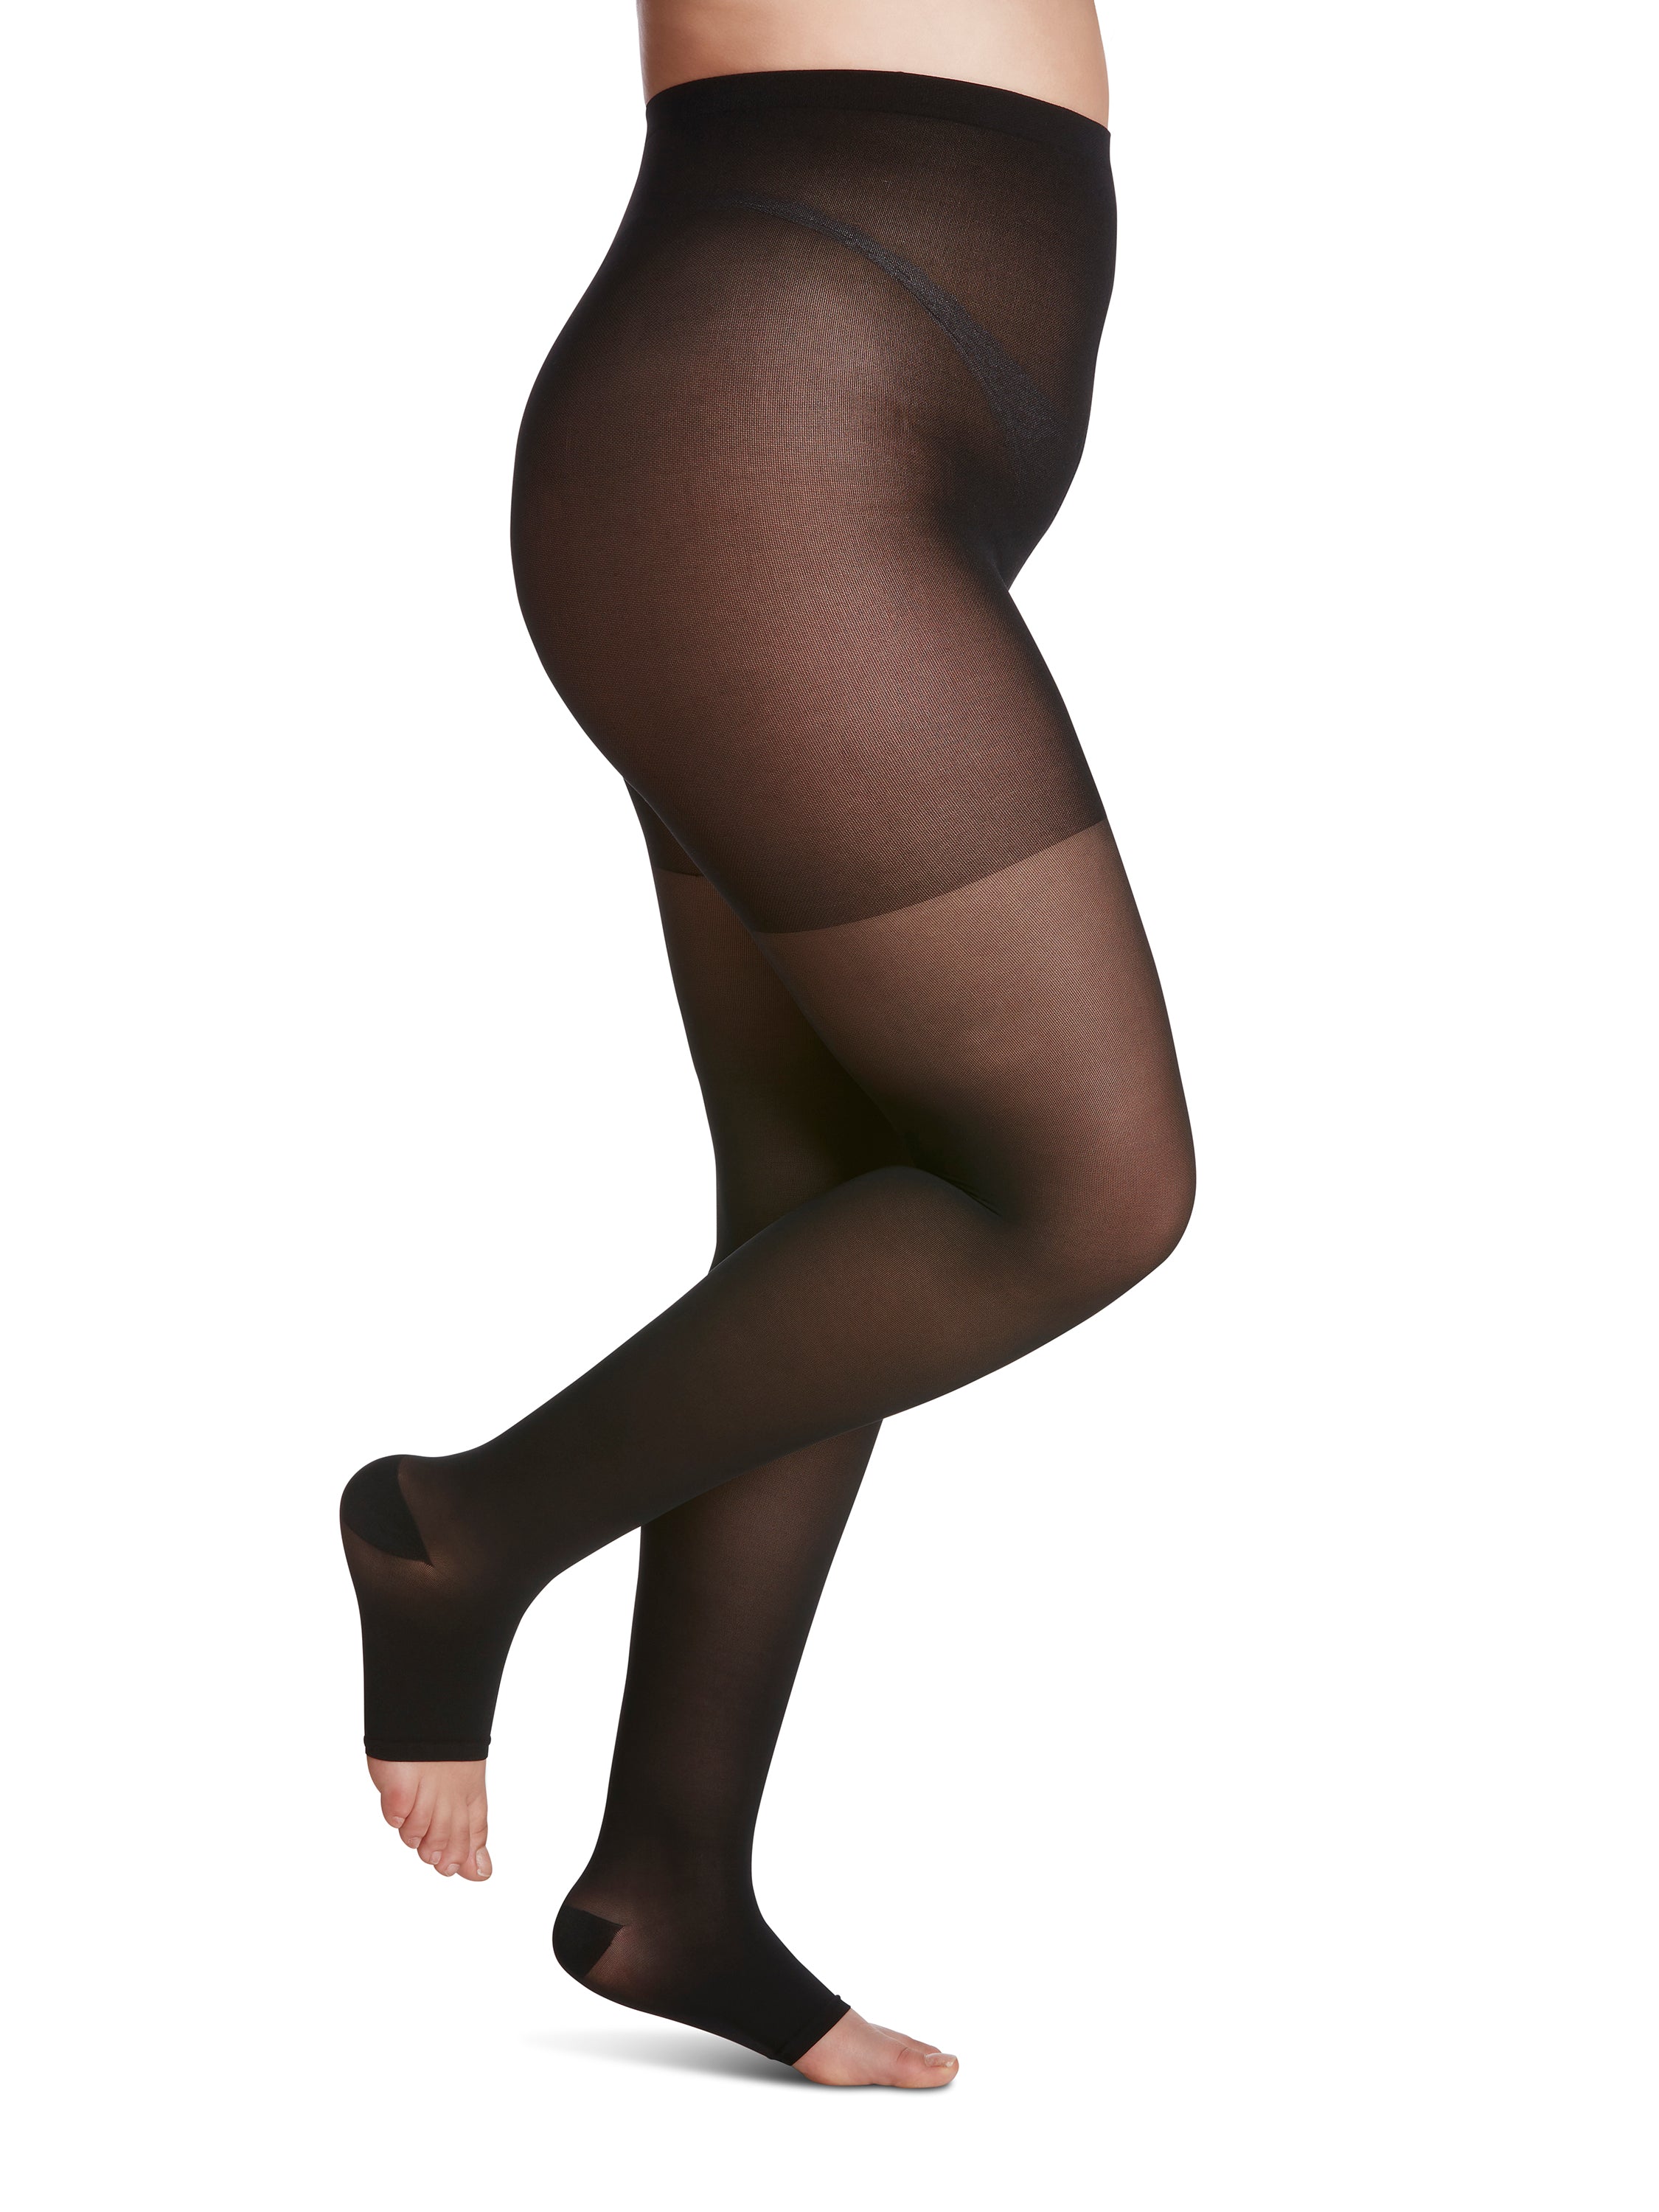 Sigvaris Women's Style Sheer Pantyhose with OPEN Toe in Fashion Colors